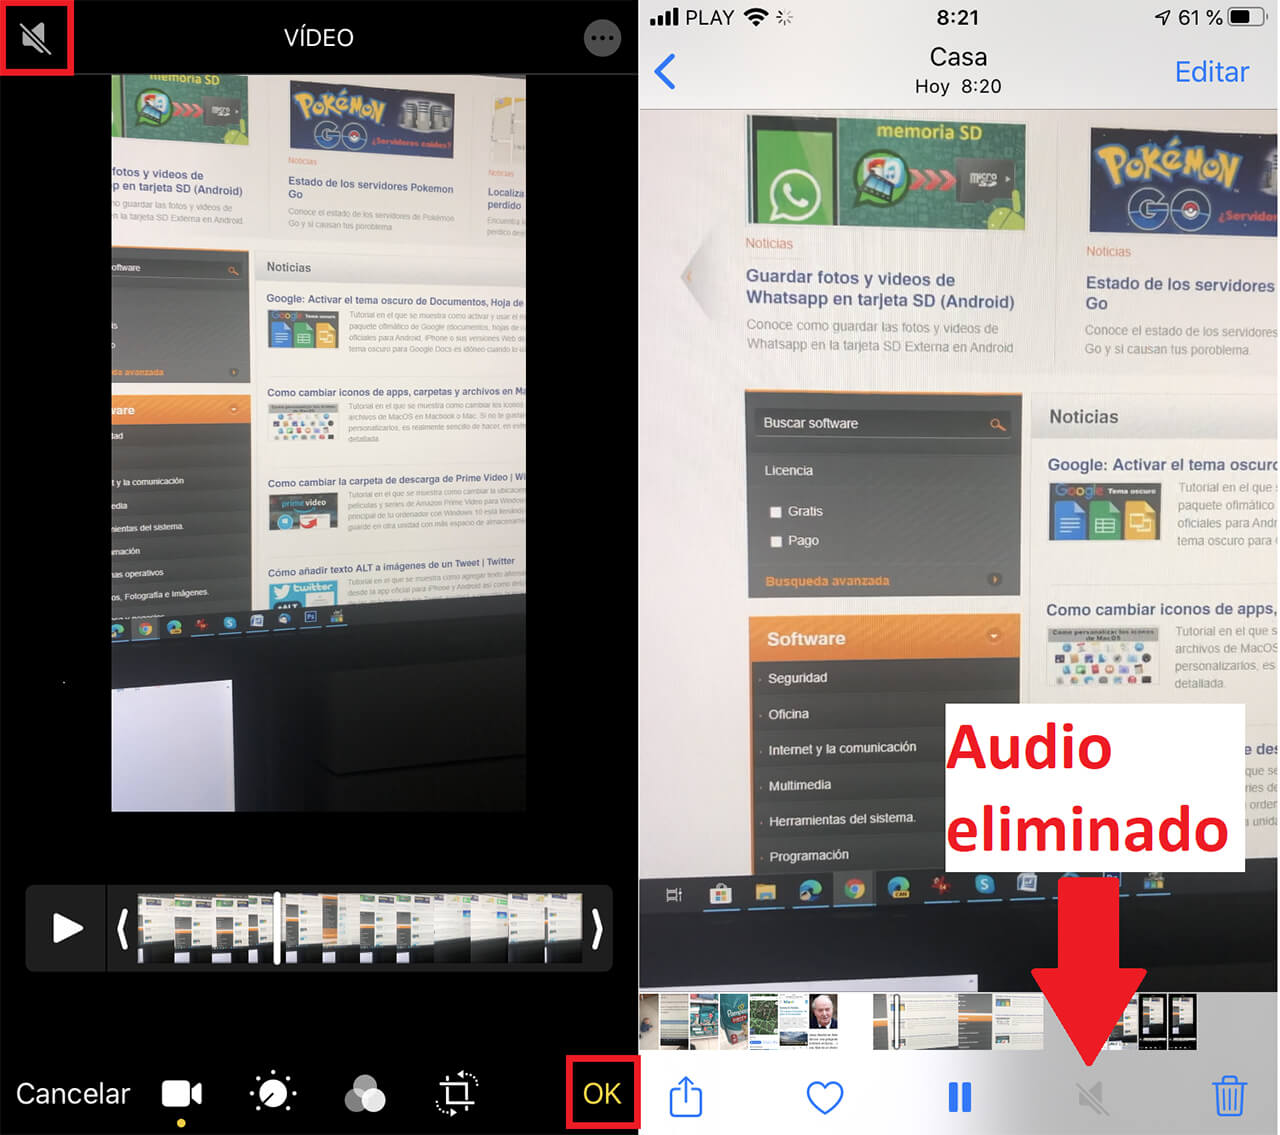 download audio from youtube to iphone